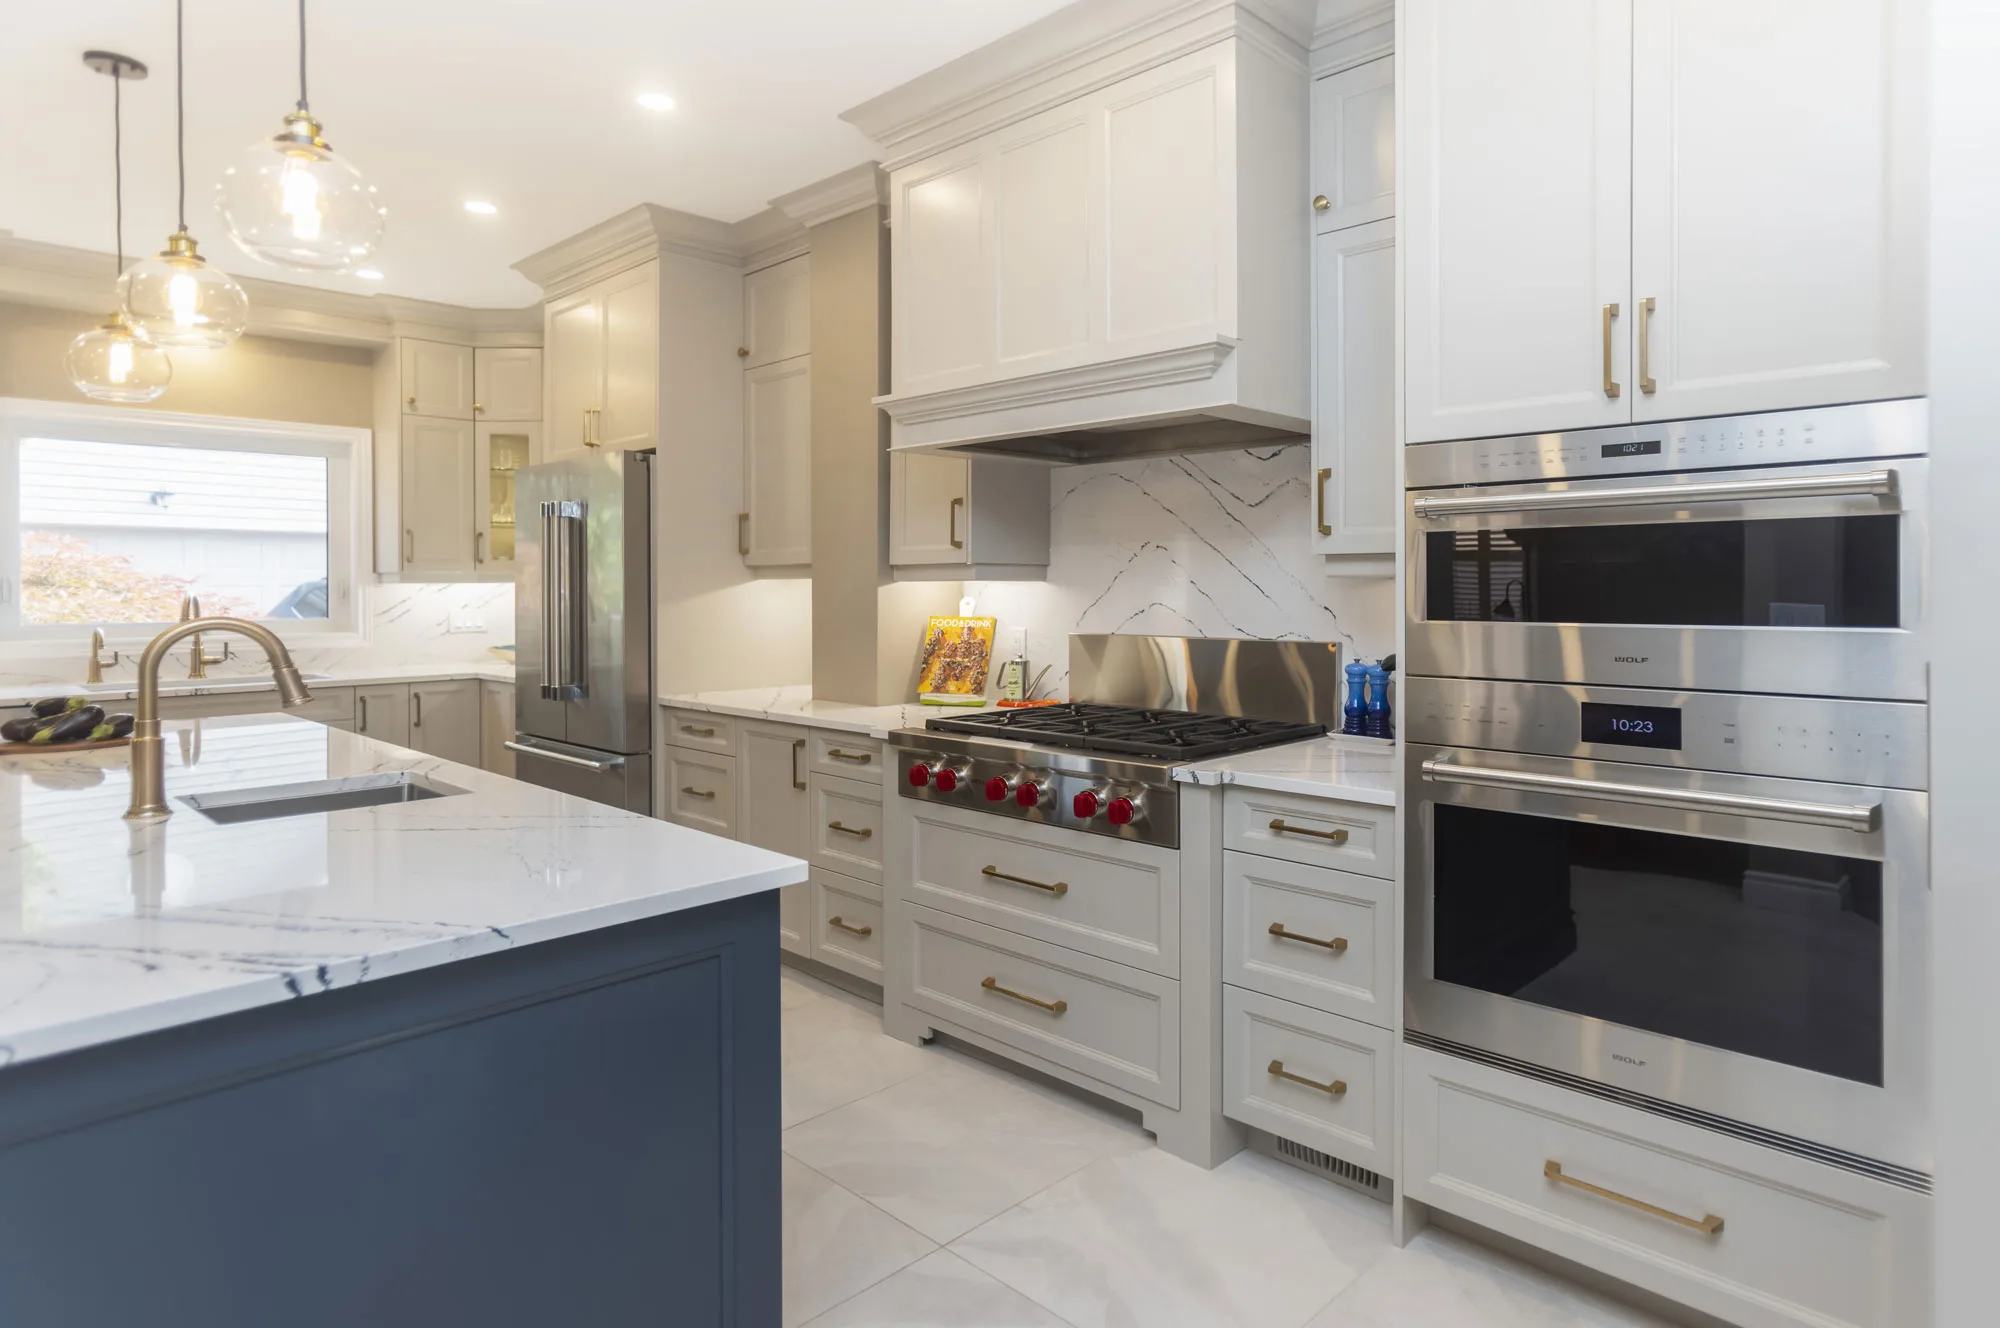 A modern kitchen with off-white cabinentry accented with gold handles along with a dark blue island with white counter tops and gold fixtures and stainless steel applicances